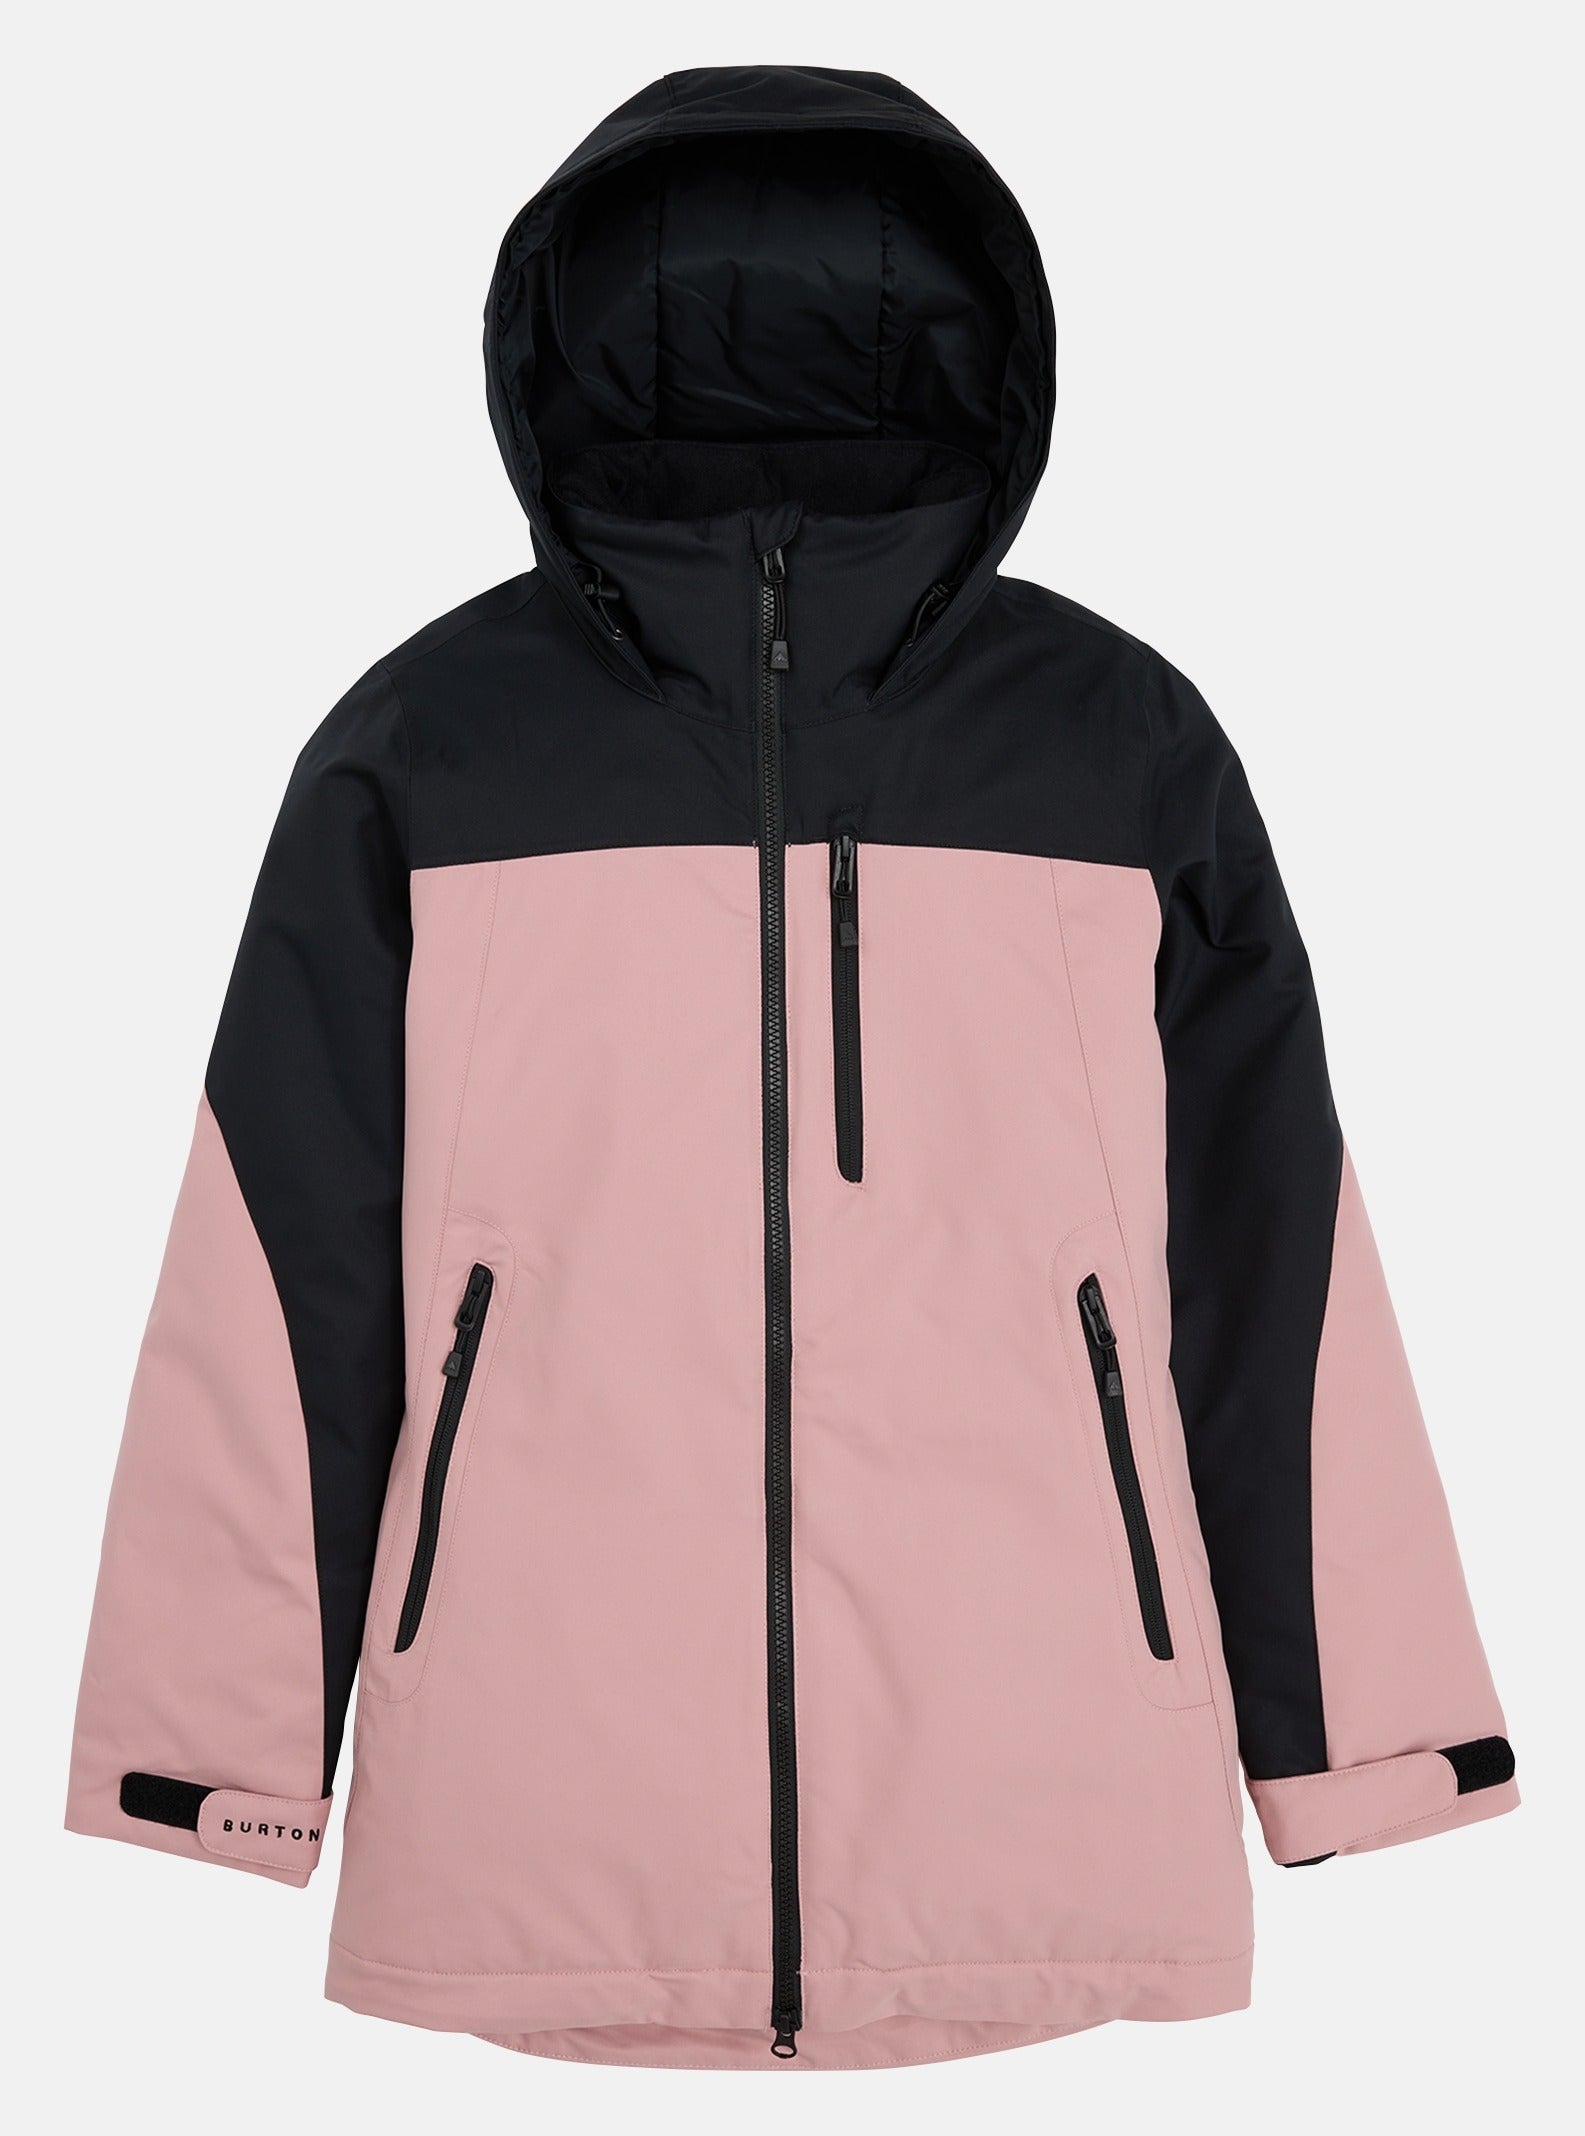 Women's Snowboard Jackets, Free Delivery